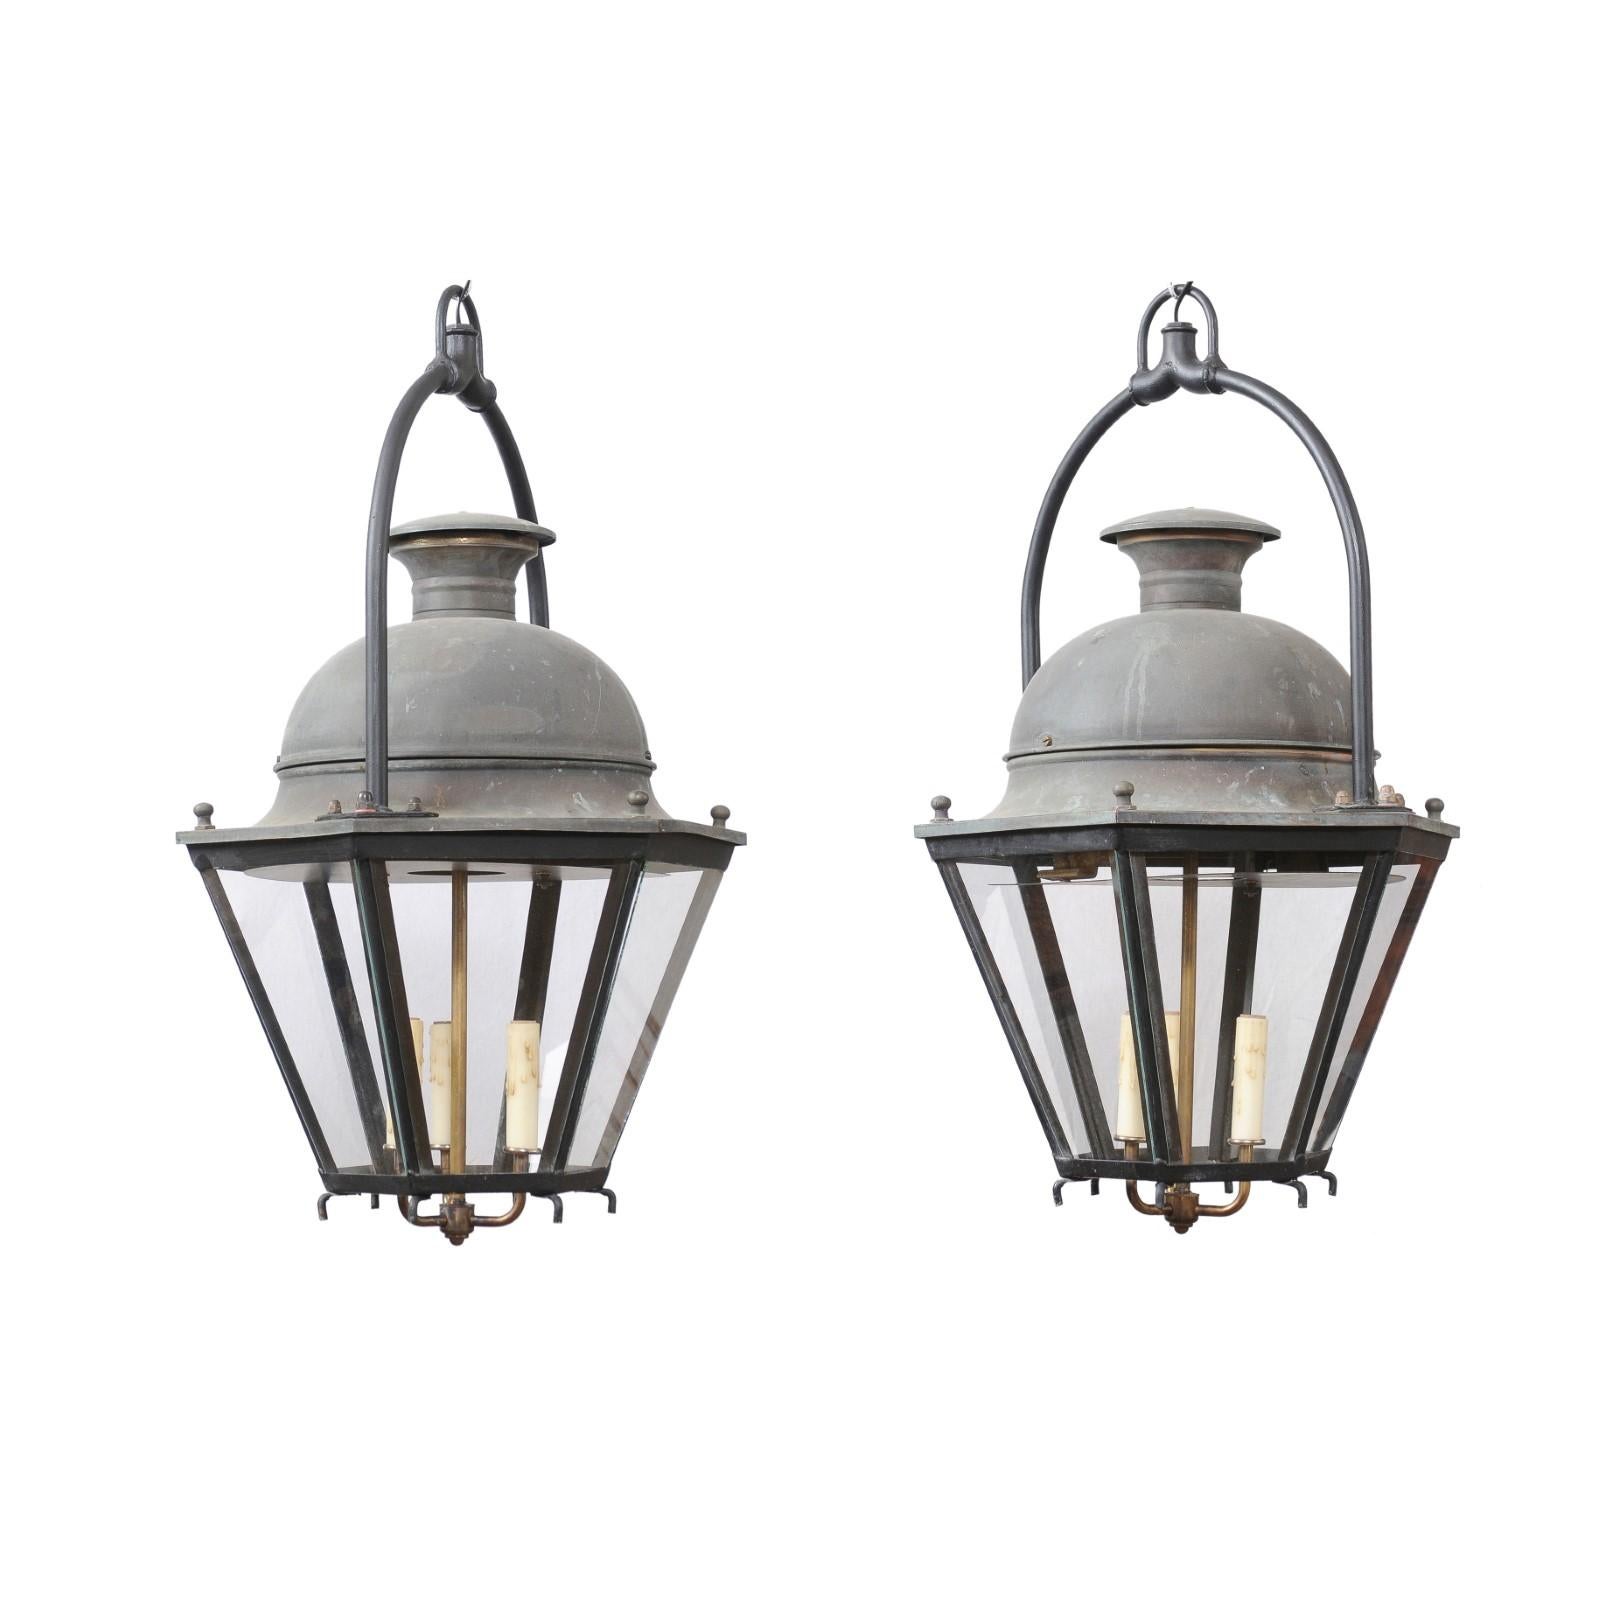 Two French hexagonal copper lanterns from the 20th century with glass panels, domed top and three lights. These two French hexagonal copper lanterns, each sold individually, are captivating pieces that seamlessly blend timeless elegance with modern